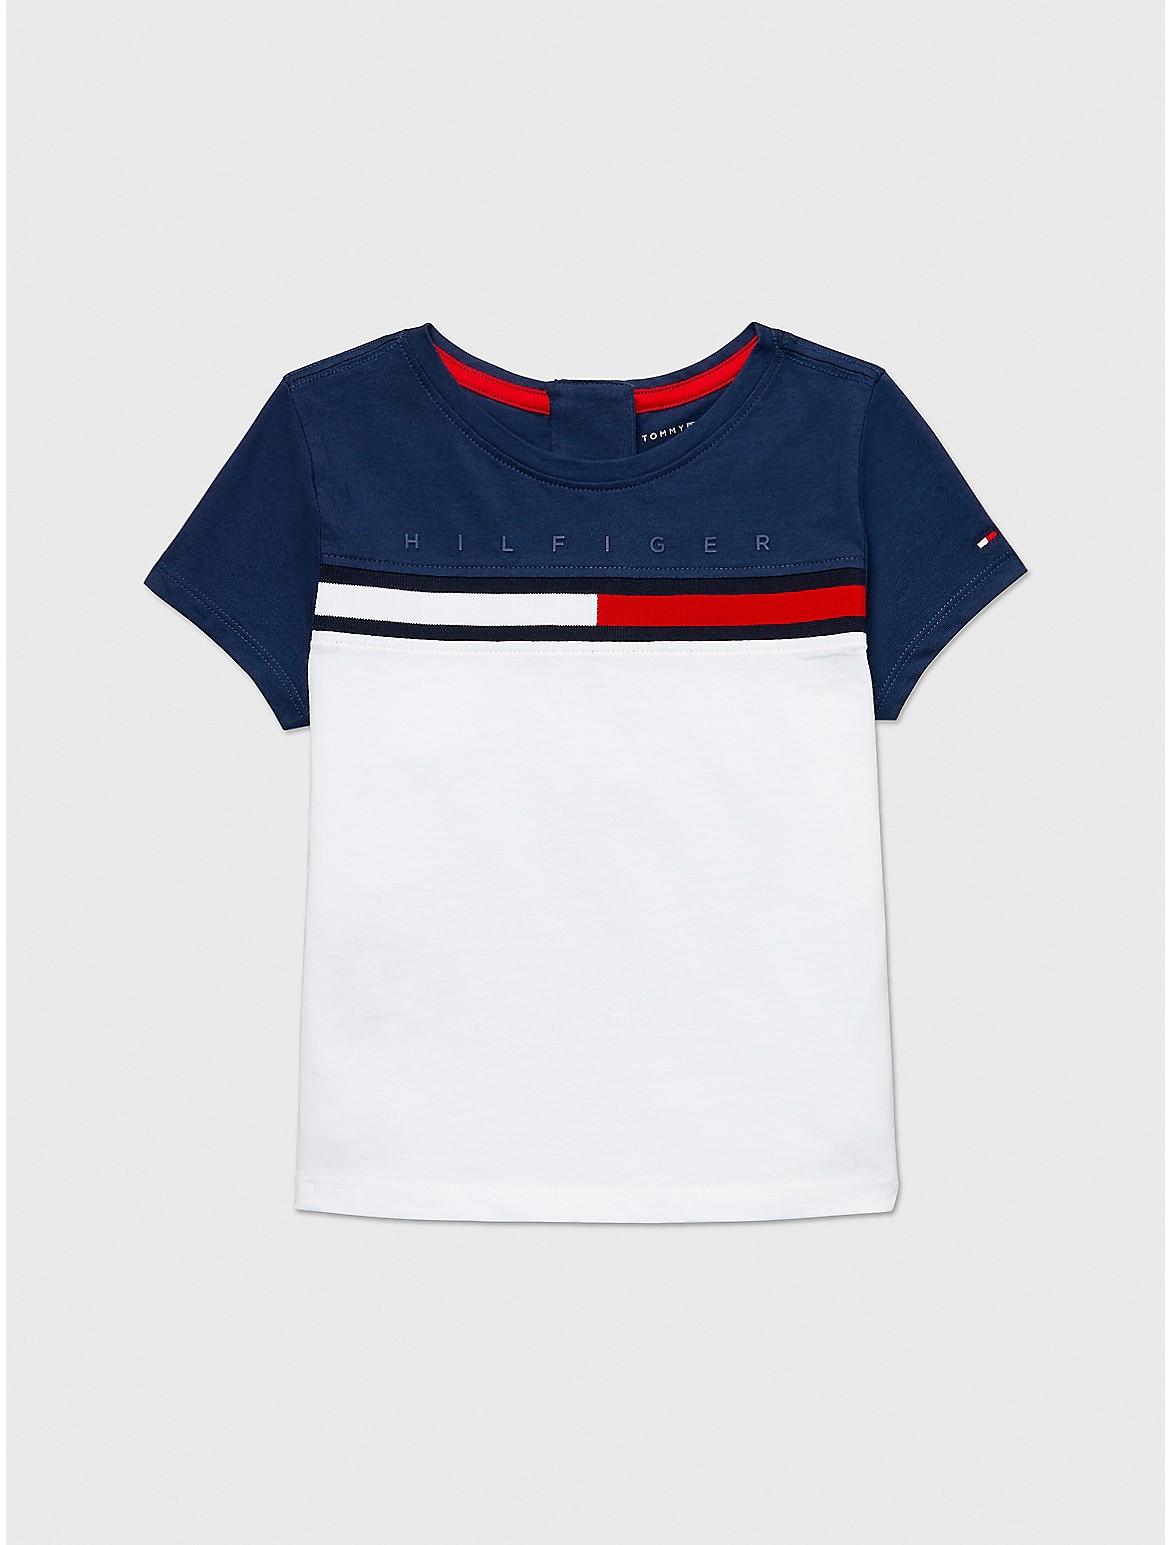 Tommy Hilfiger Girls' Kids' Seated Fit Colorblock T-Shirt